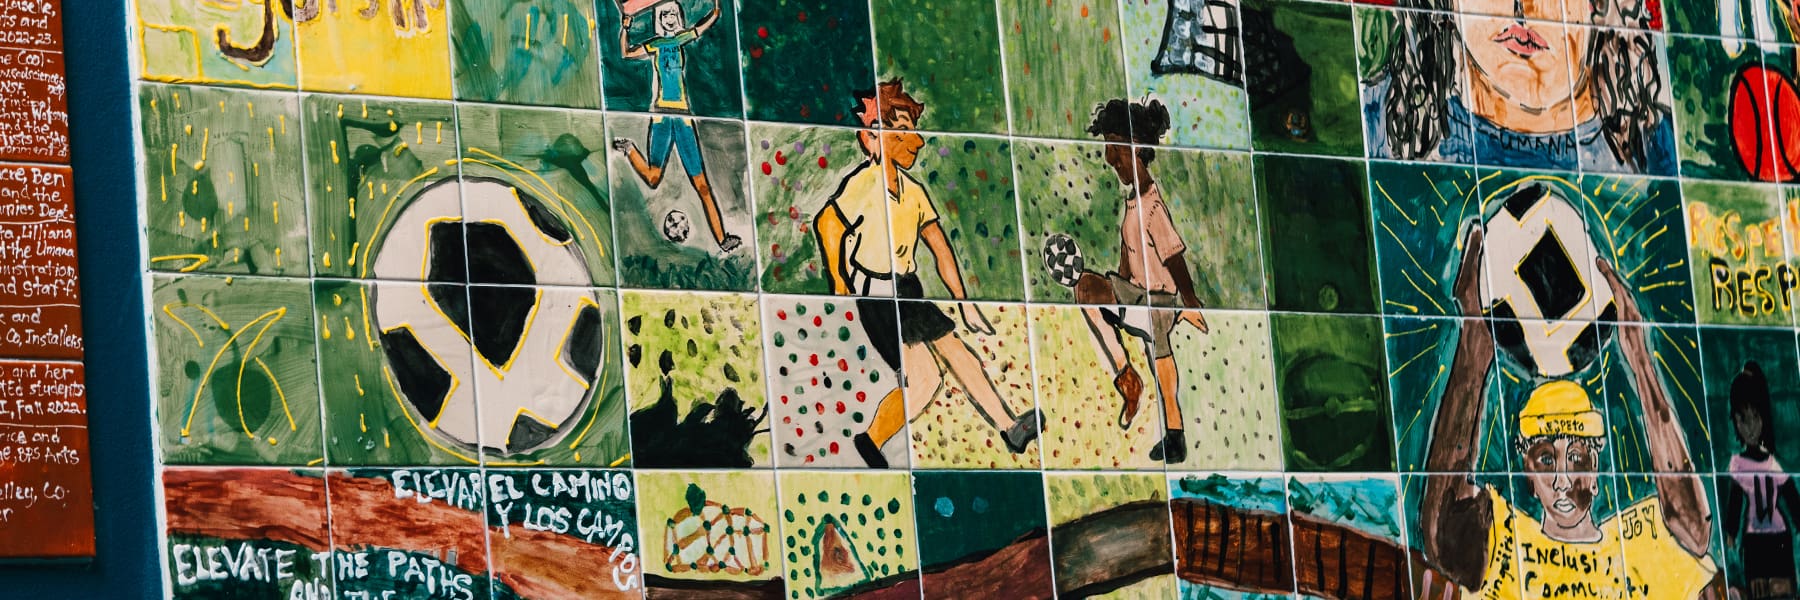 Mural of young people playing soccer in Boston.